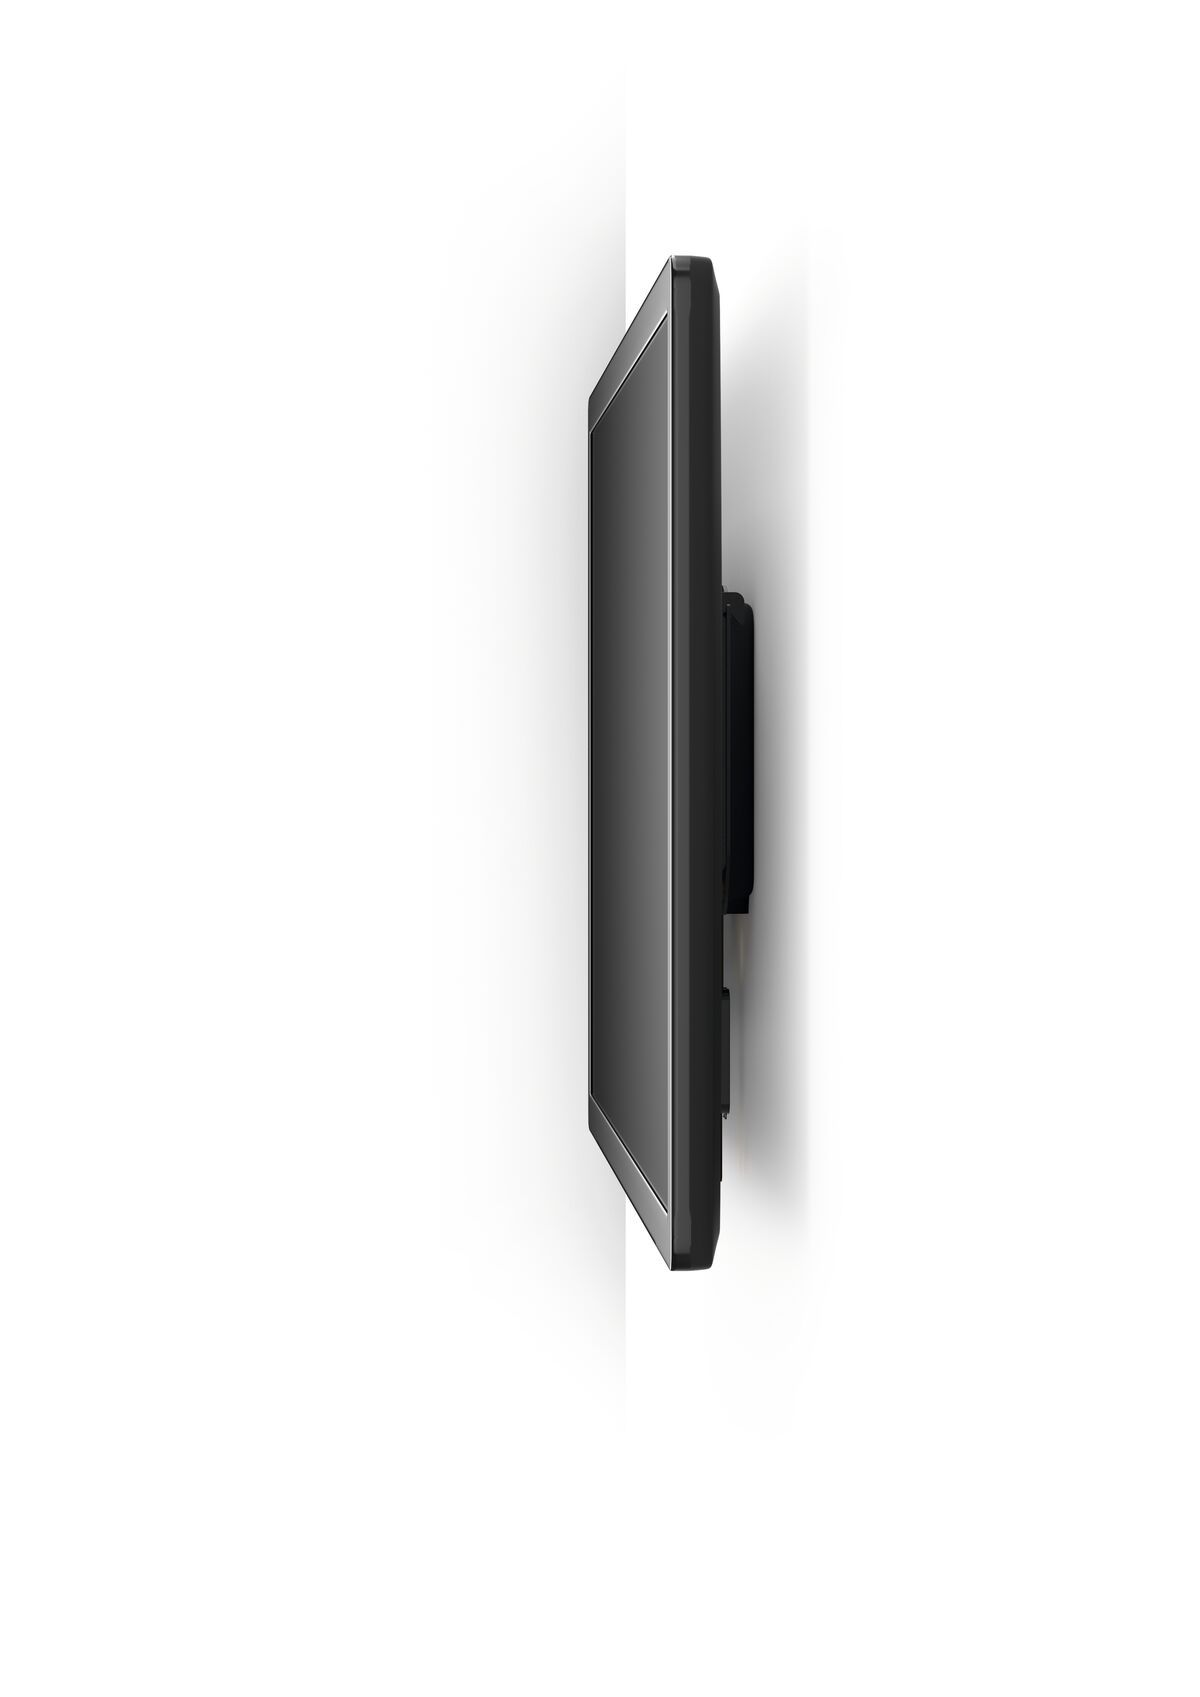 Vogel's WALL 2005 Fixed TV Wall Mount - Suitable for 17 up to 26 inch TVs up to White wall